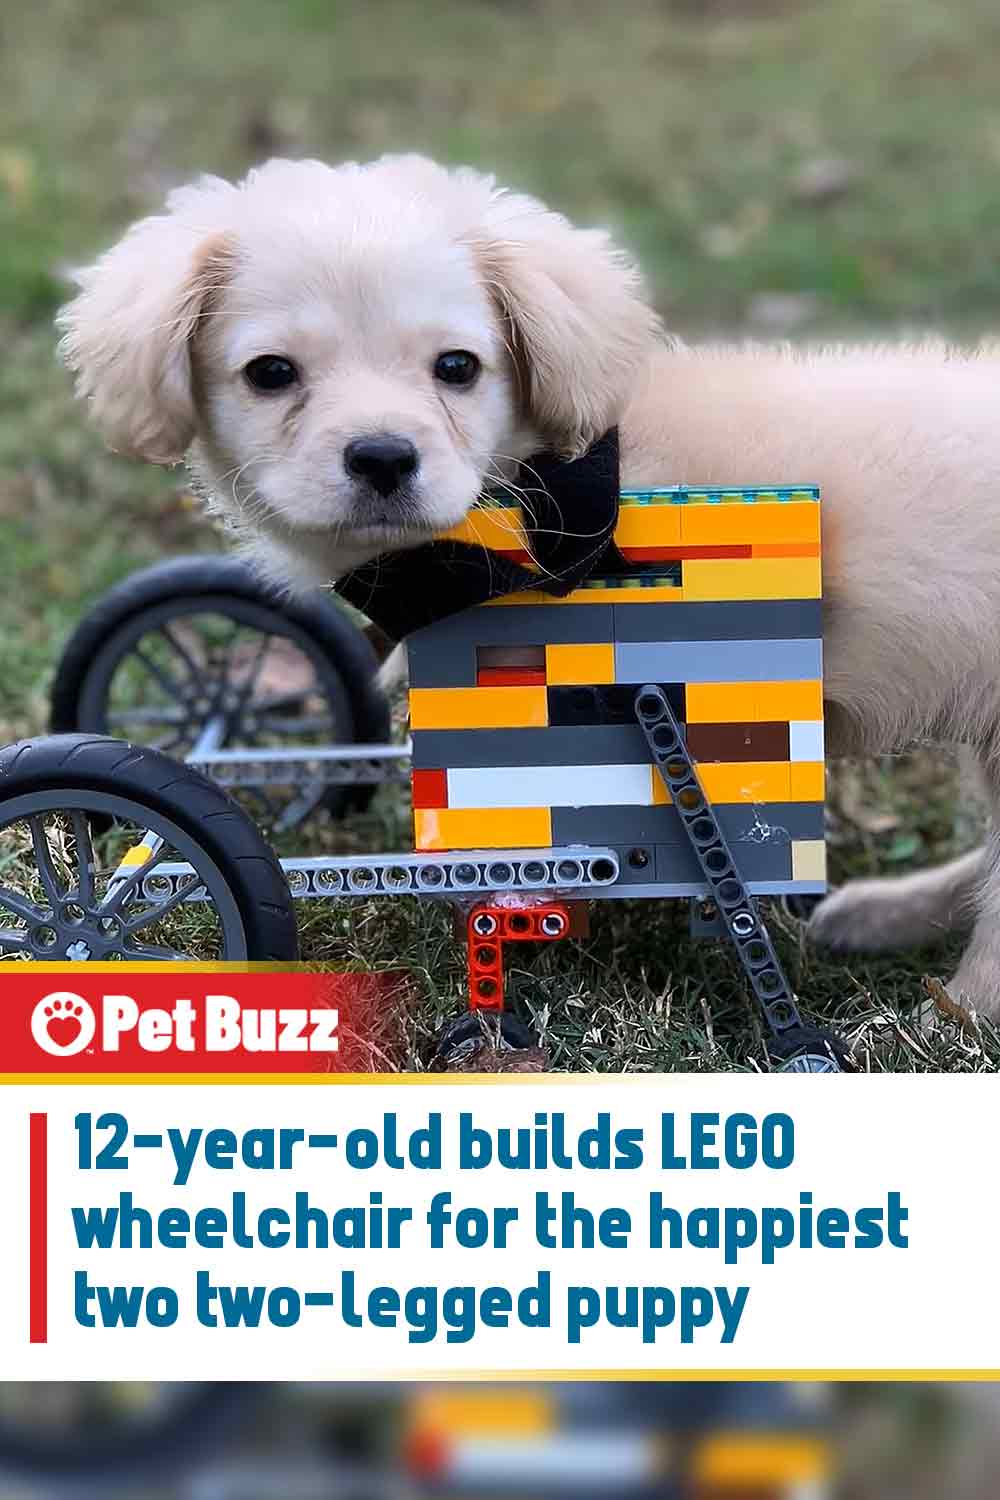 12-year-old builds LEGO wheelchair for the happiest two-legged puppy